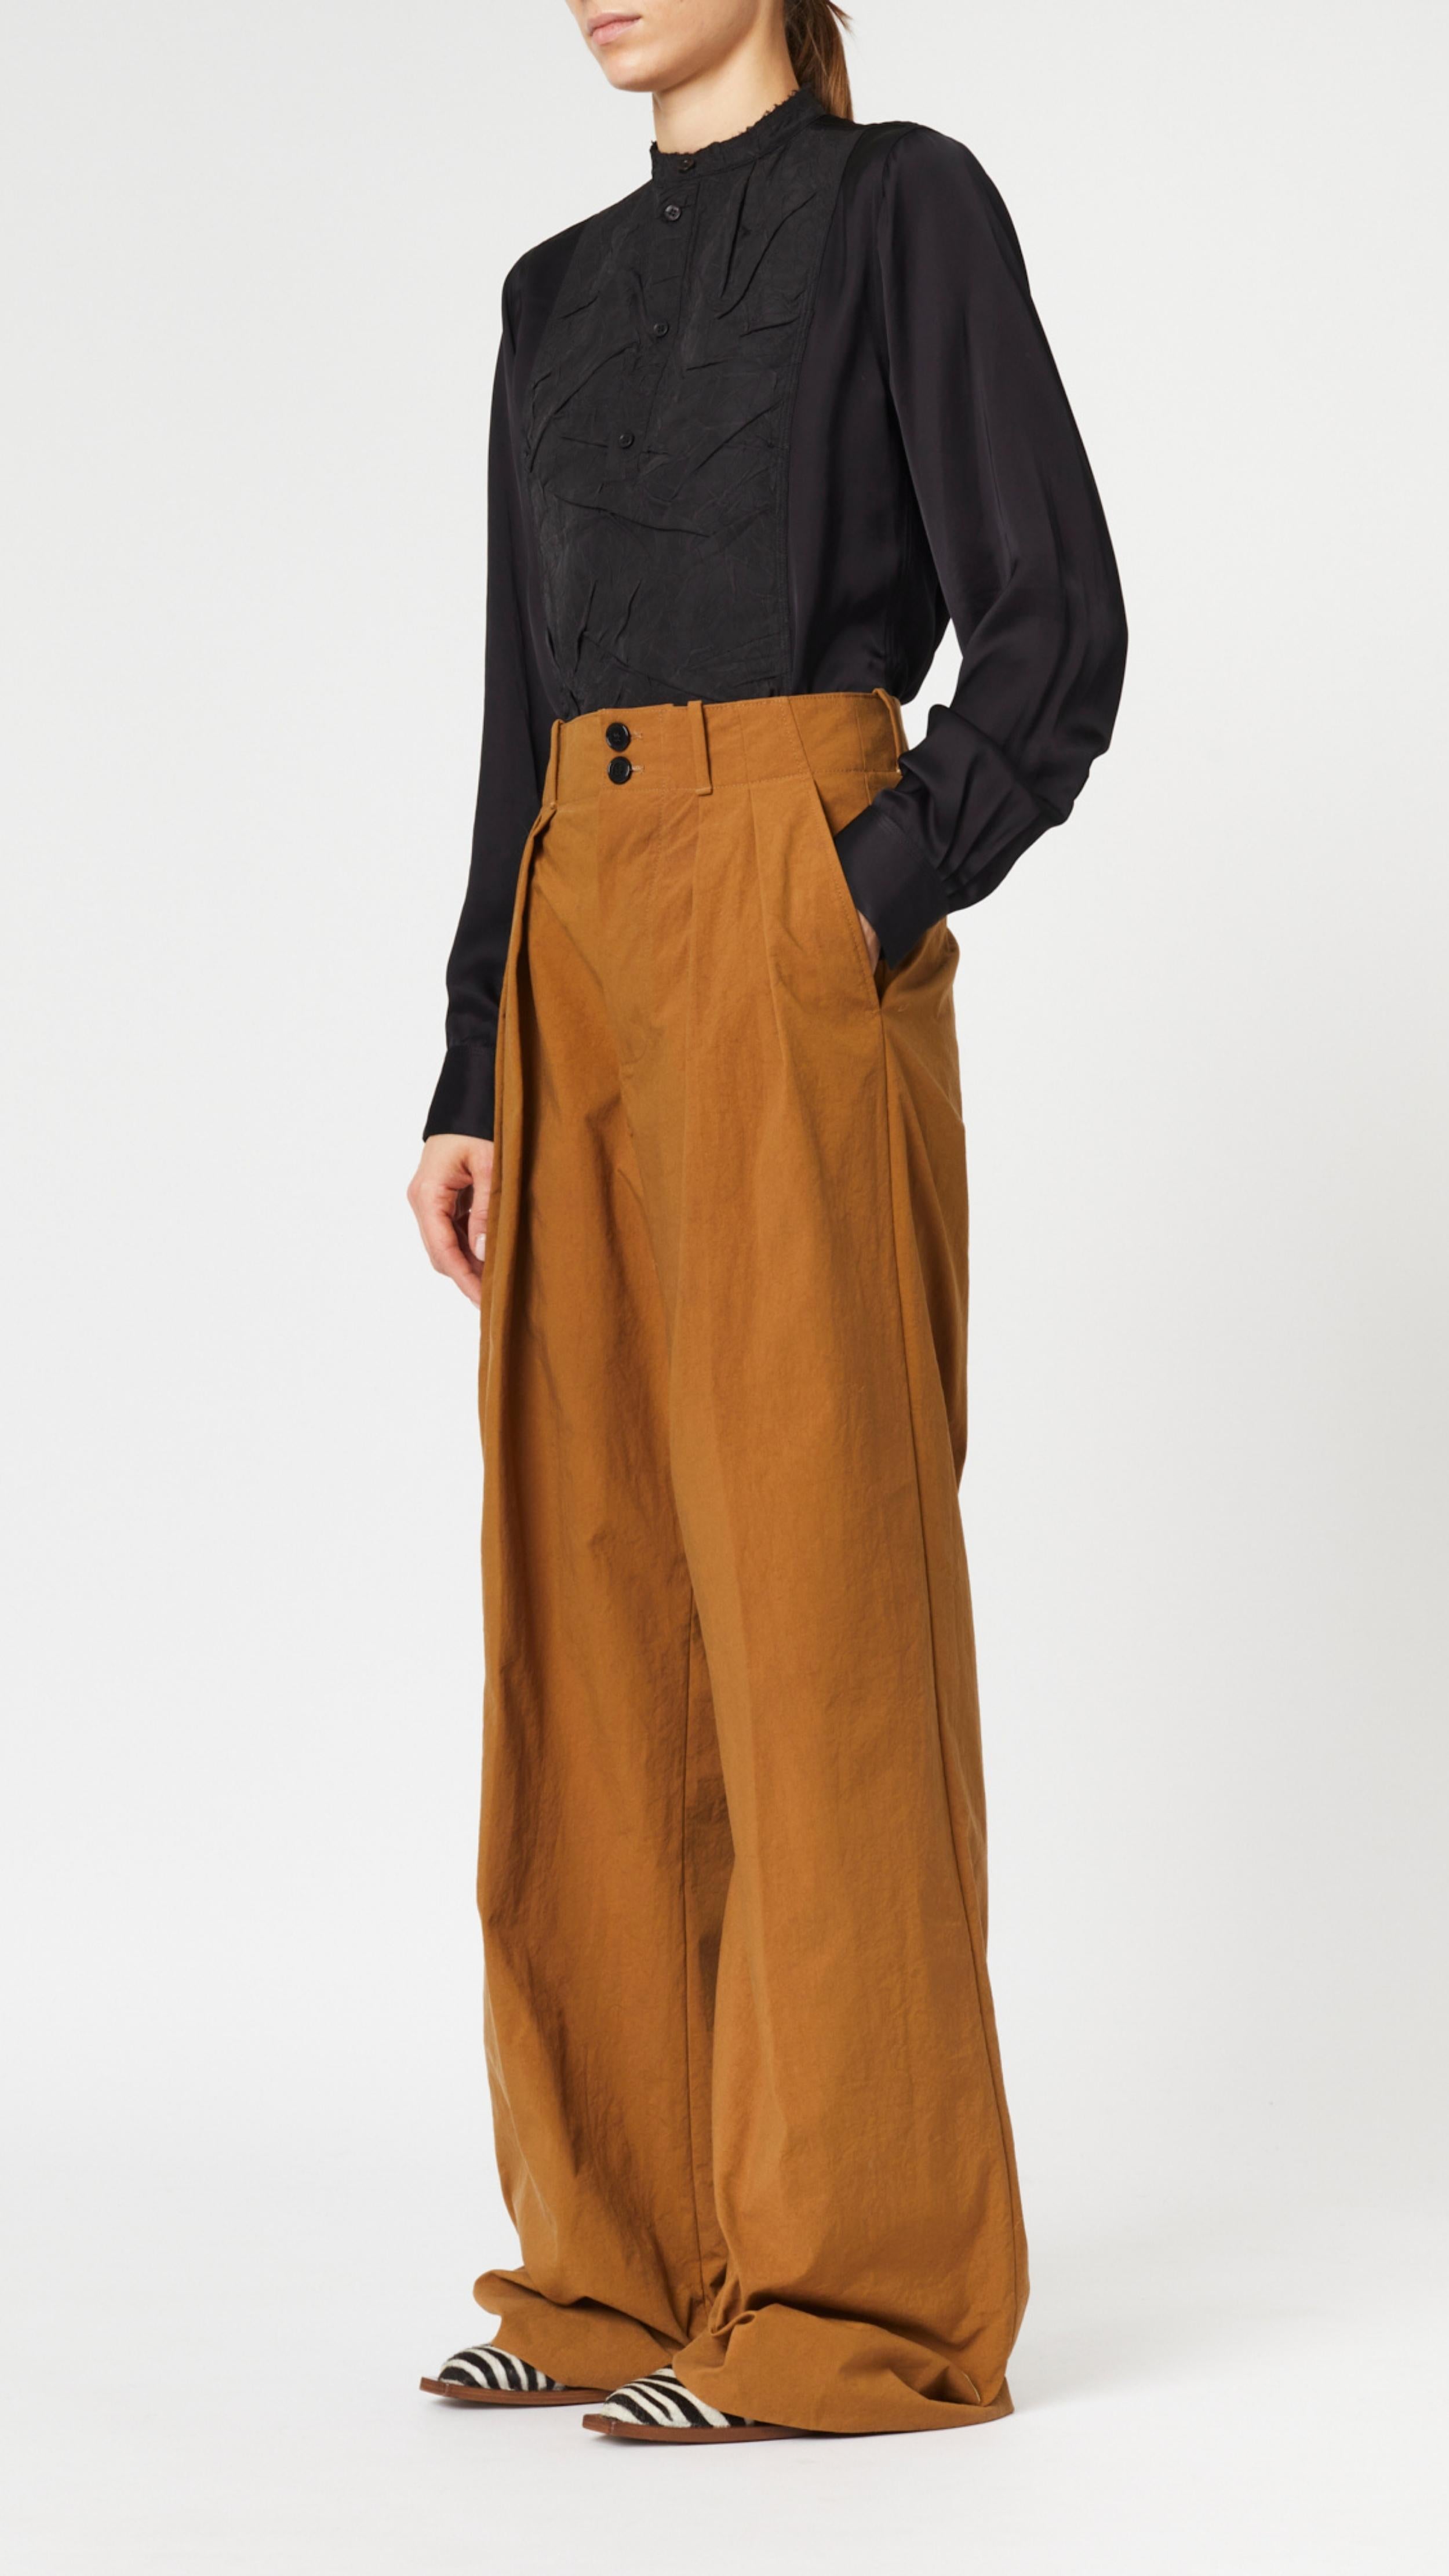 Plan C Camel Boyfriend Trouser in Nylon. Slightly oversized style with high waist and double button front closure. Pleated front panels and loose fit. Photo shown on model facing side with hand in pocket..